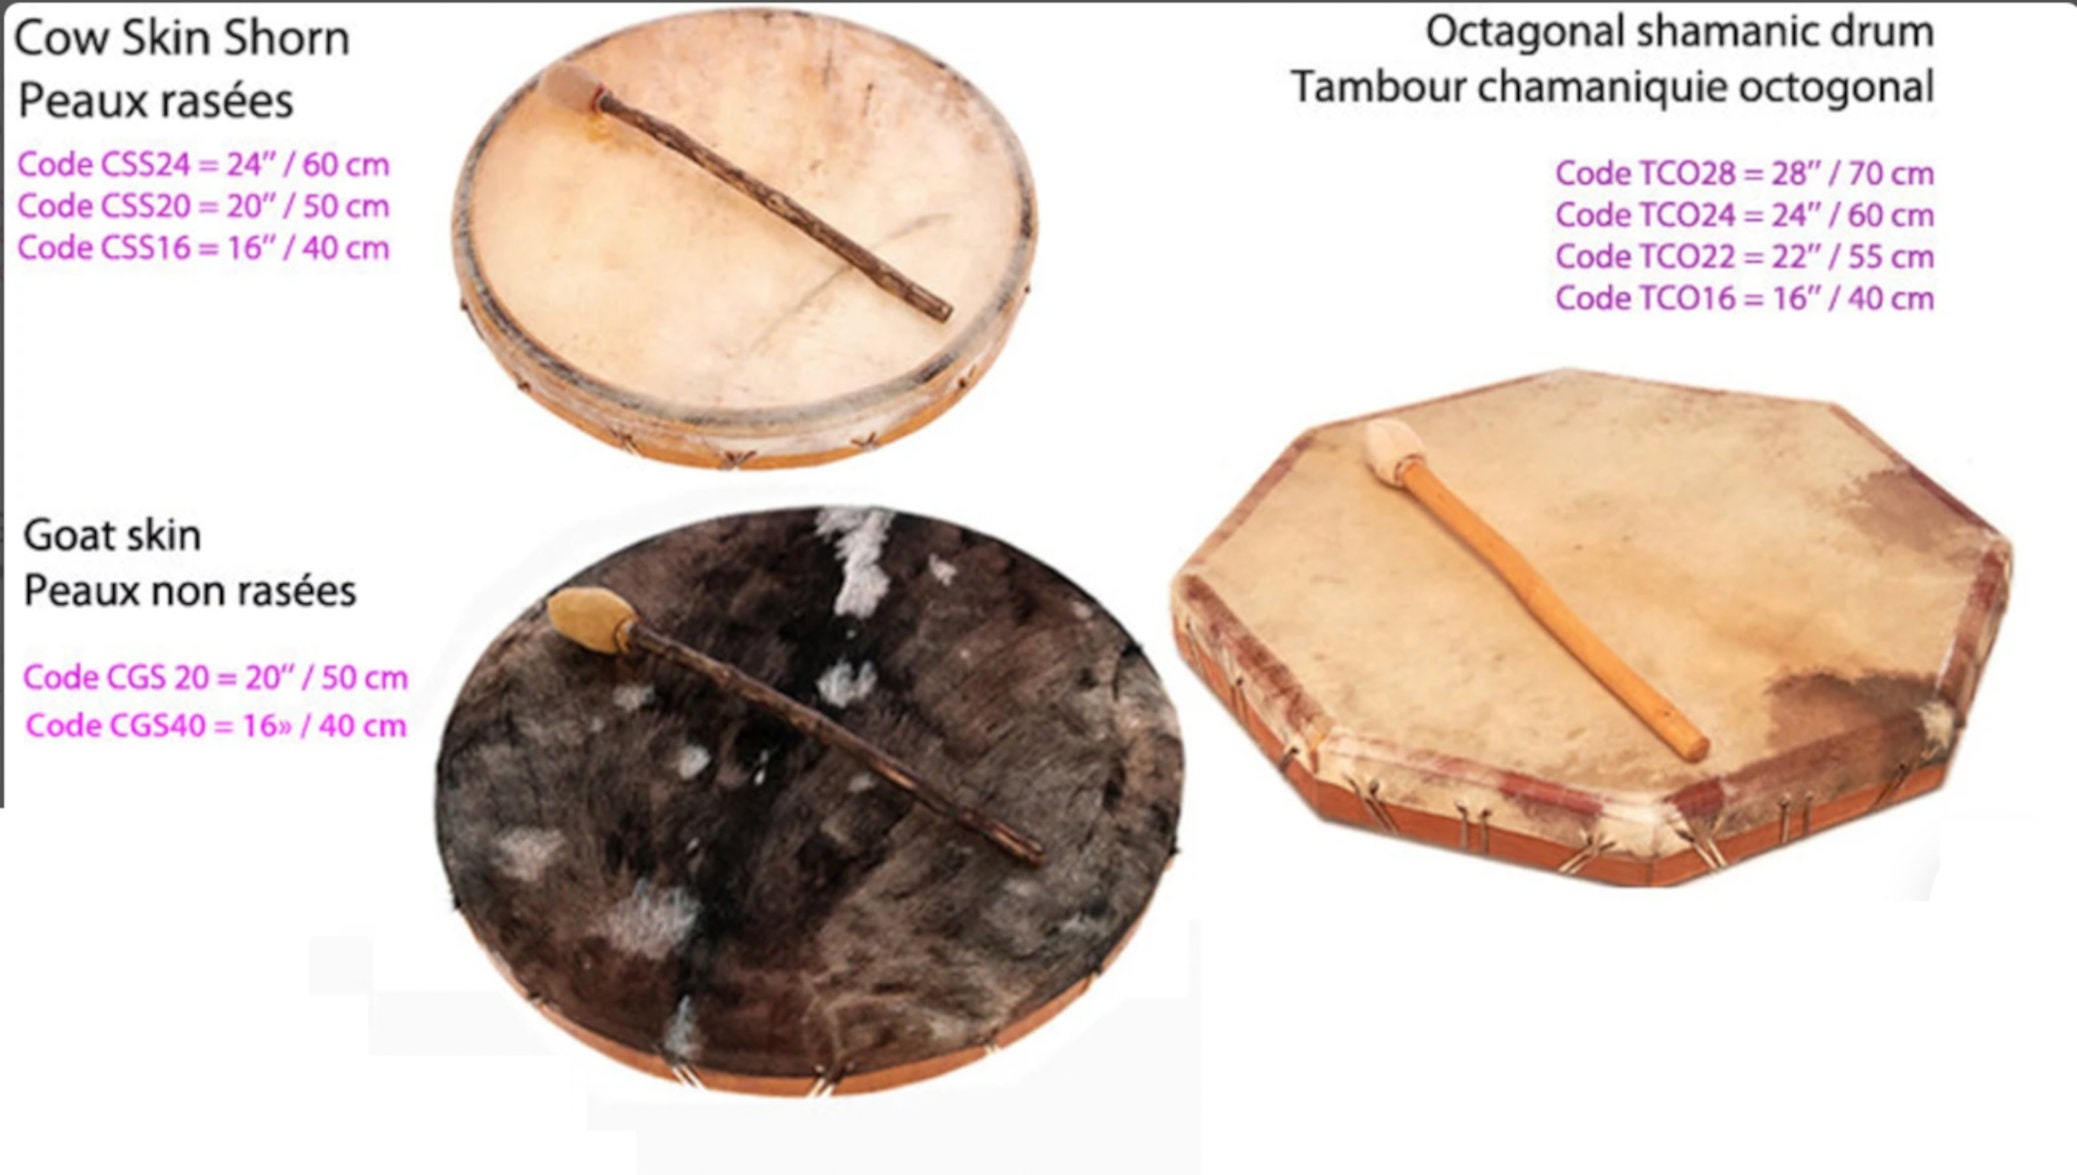 Shamanic Drums From 40 to 70cm 16 to 22'' With Suitable Mallets Very  Good Quality, Made According to the Rules of the Art Magical -   Canada